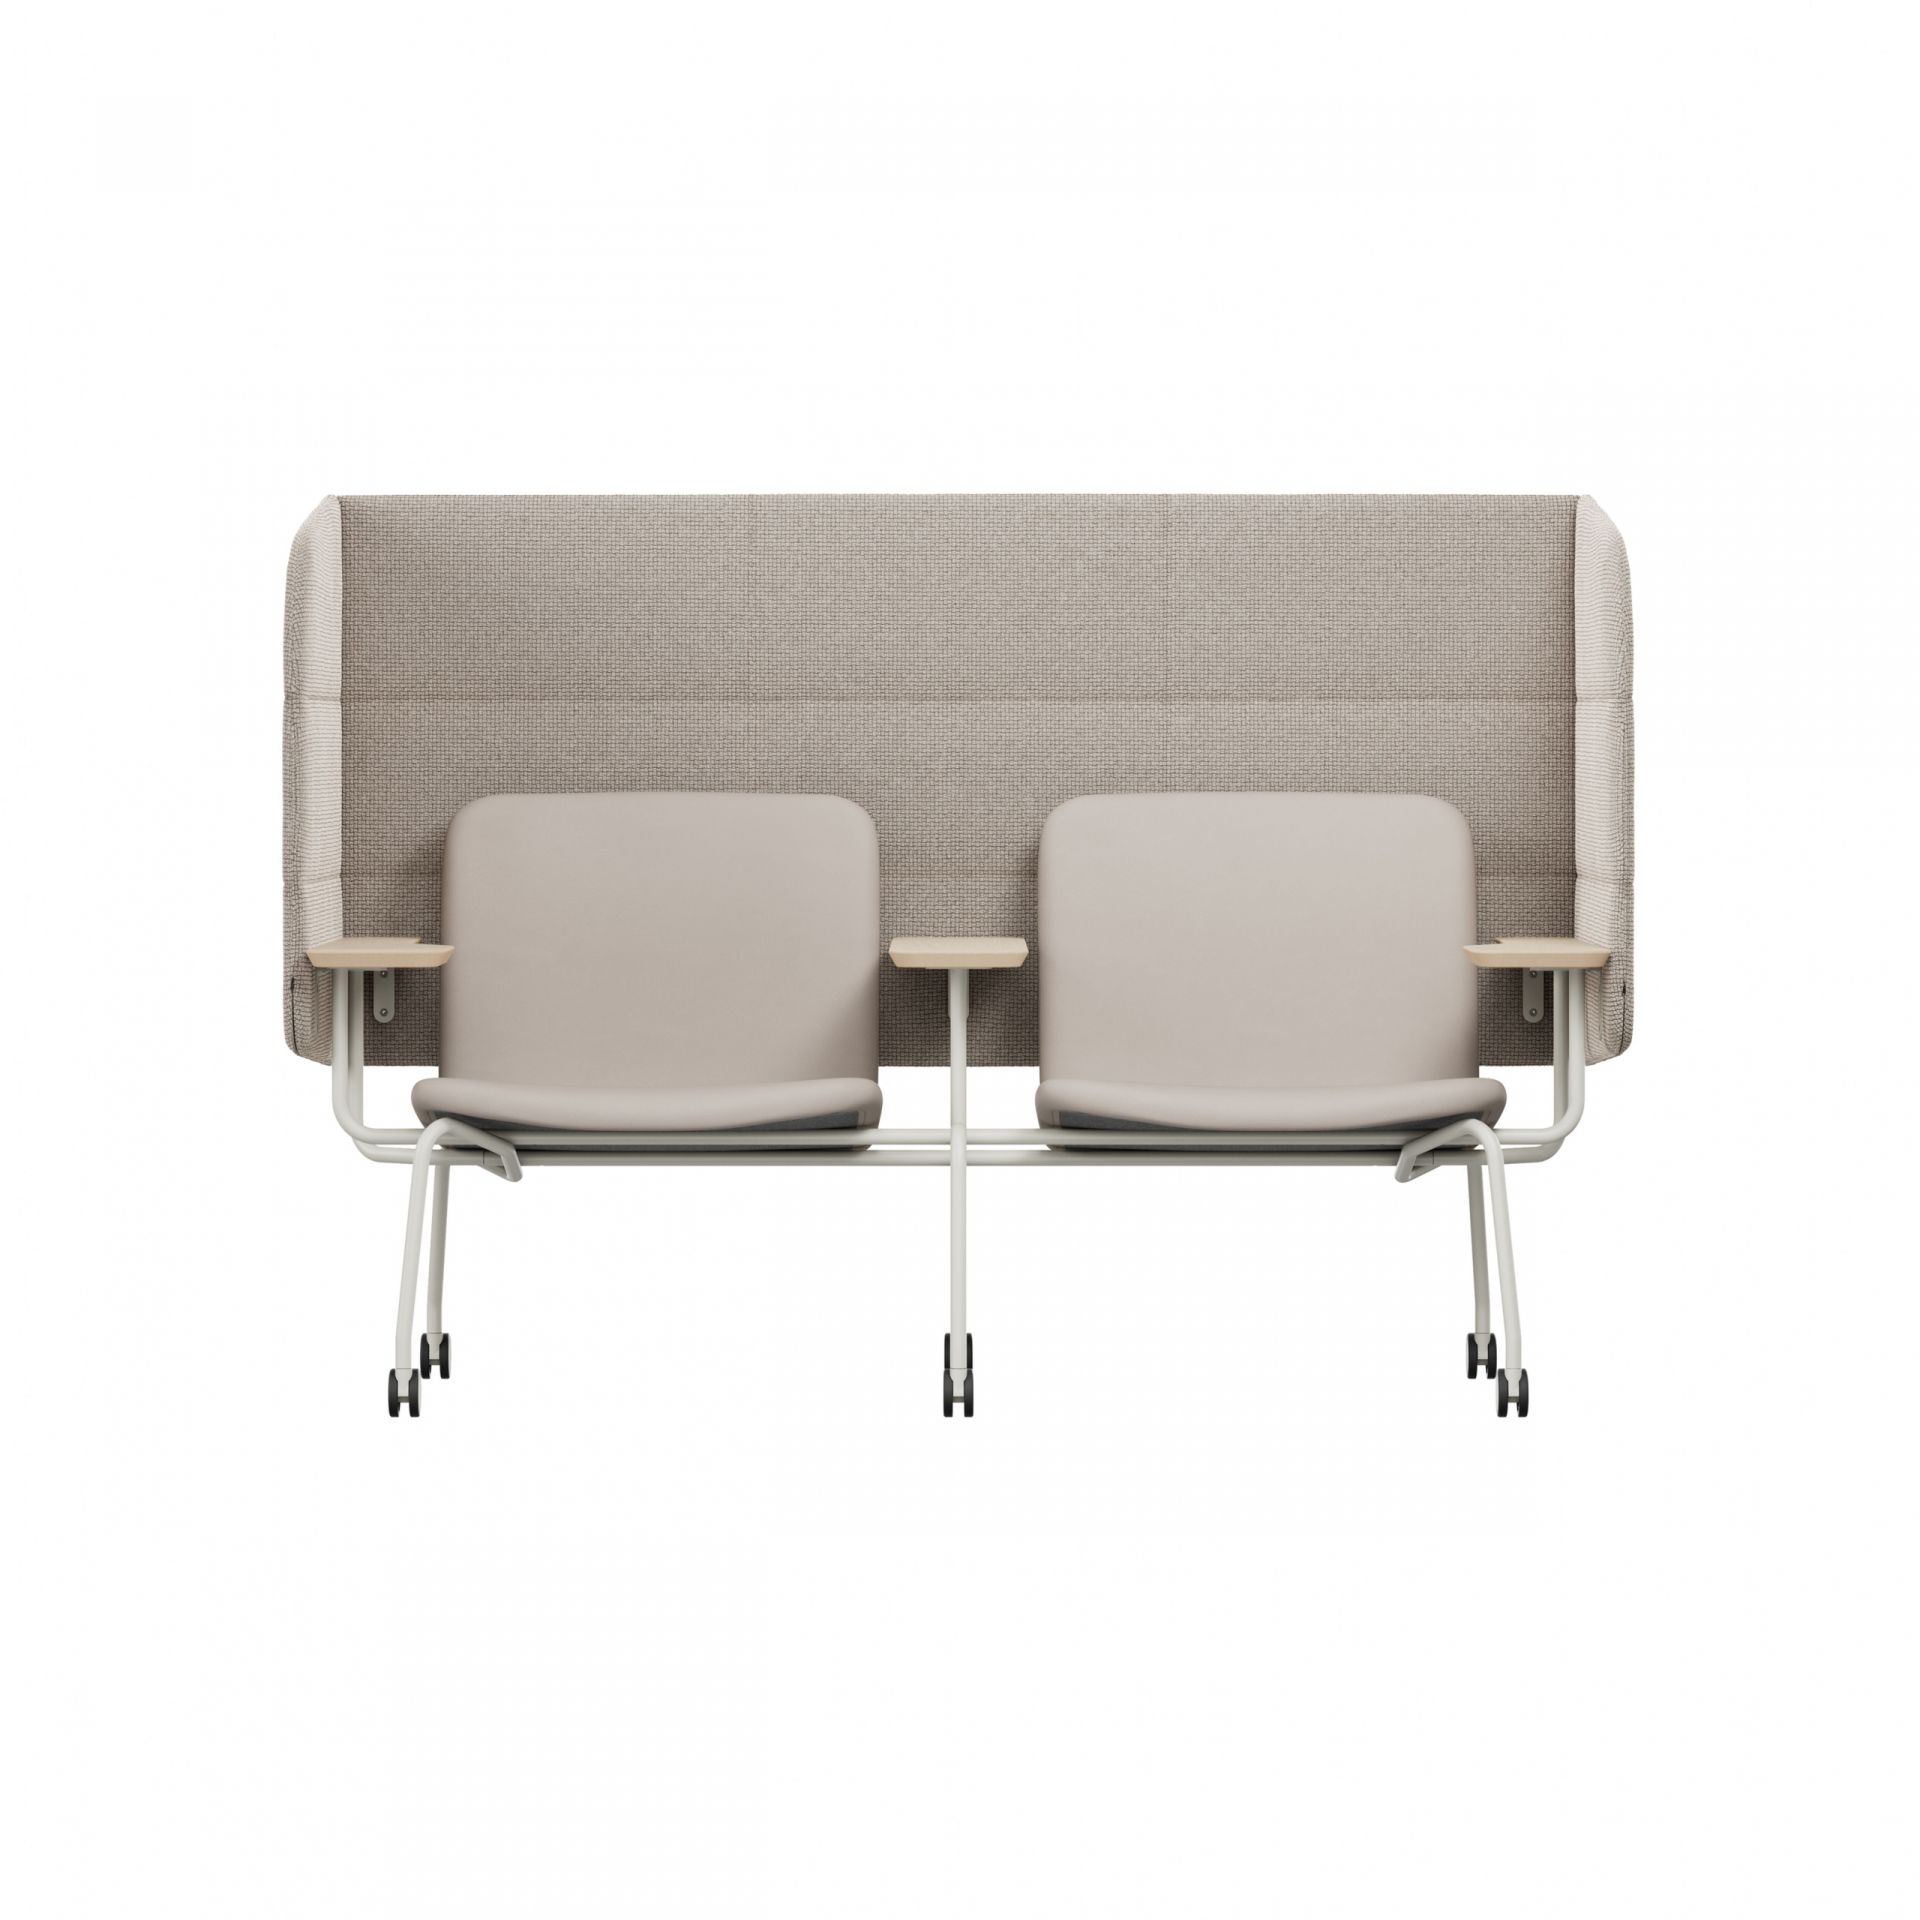 Hybe Pod / meeting place 2-seater product image 1